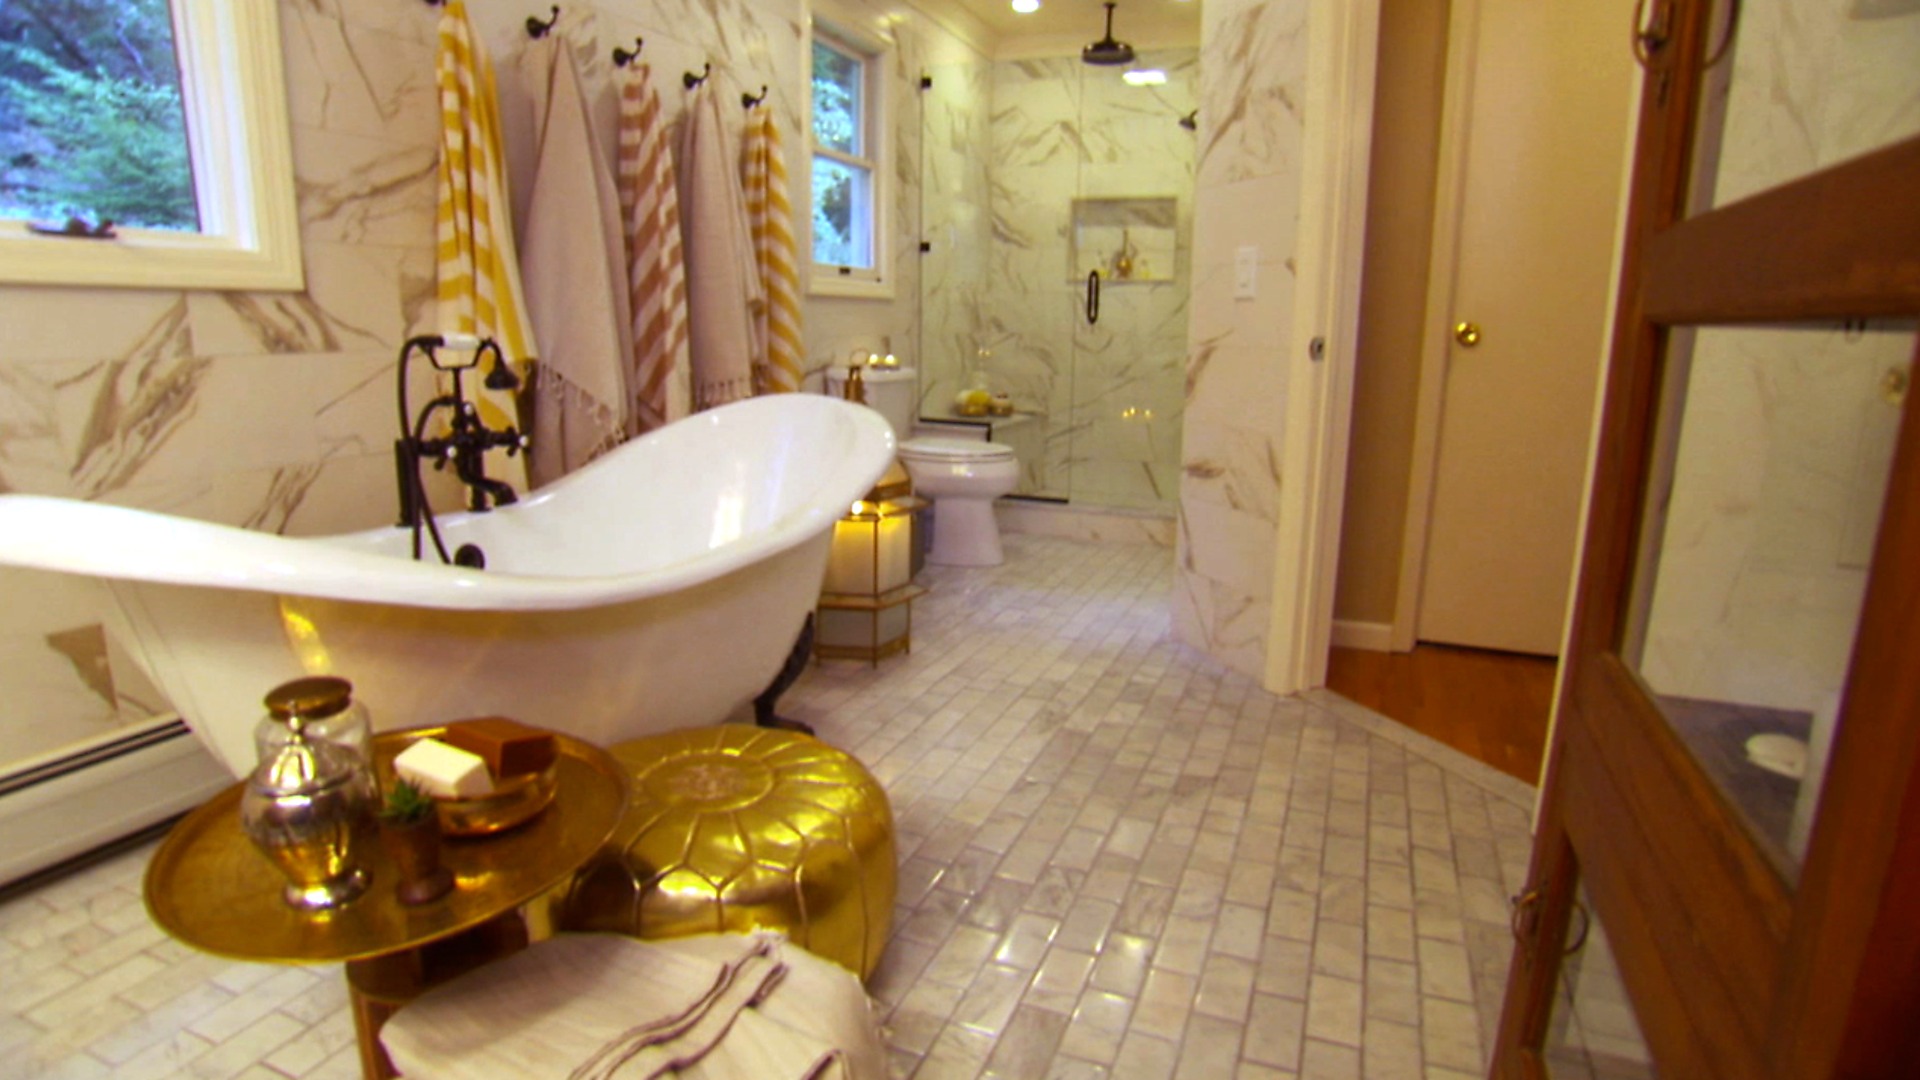 The claw foot bathtub is the focus in this master bathroom.